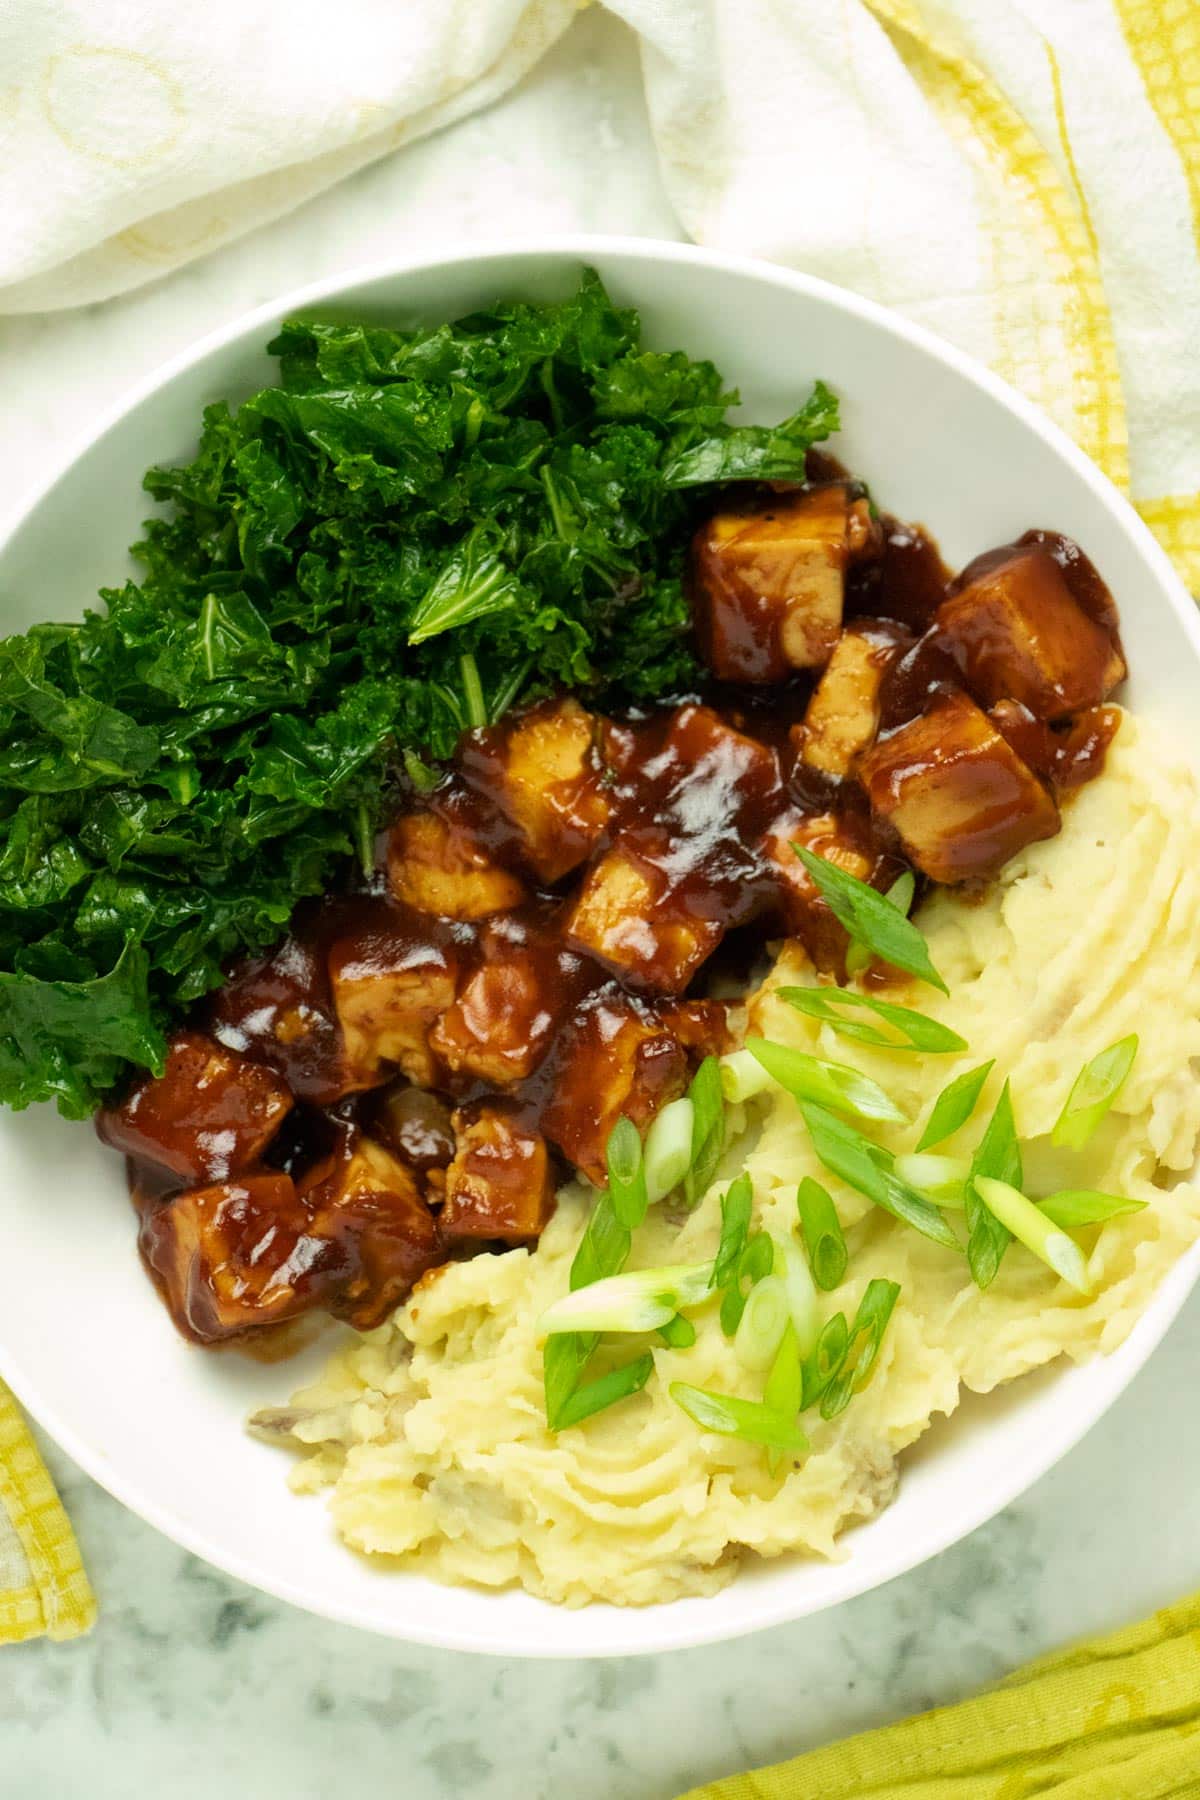 bbq tofu bowl with mashed potatoes and kale